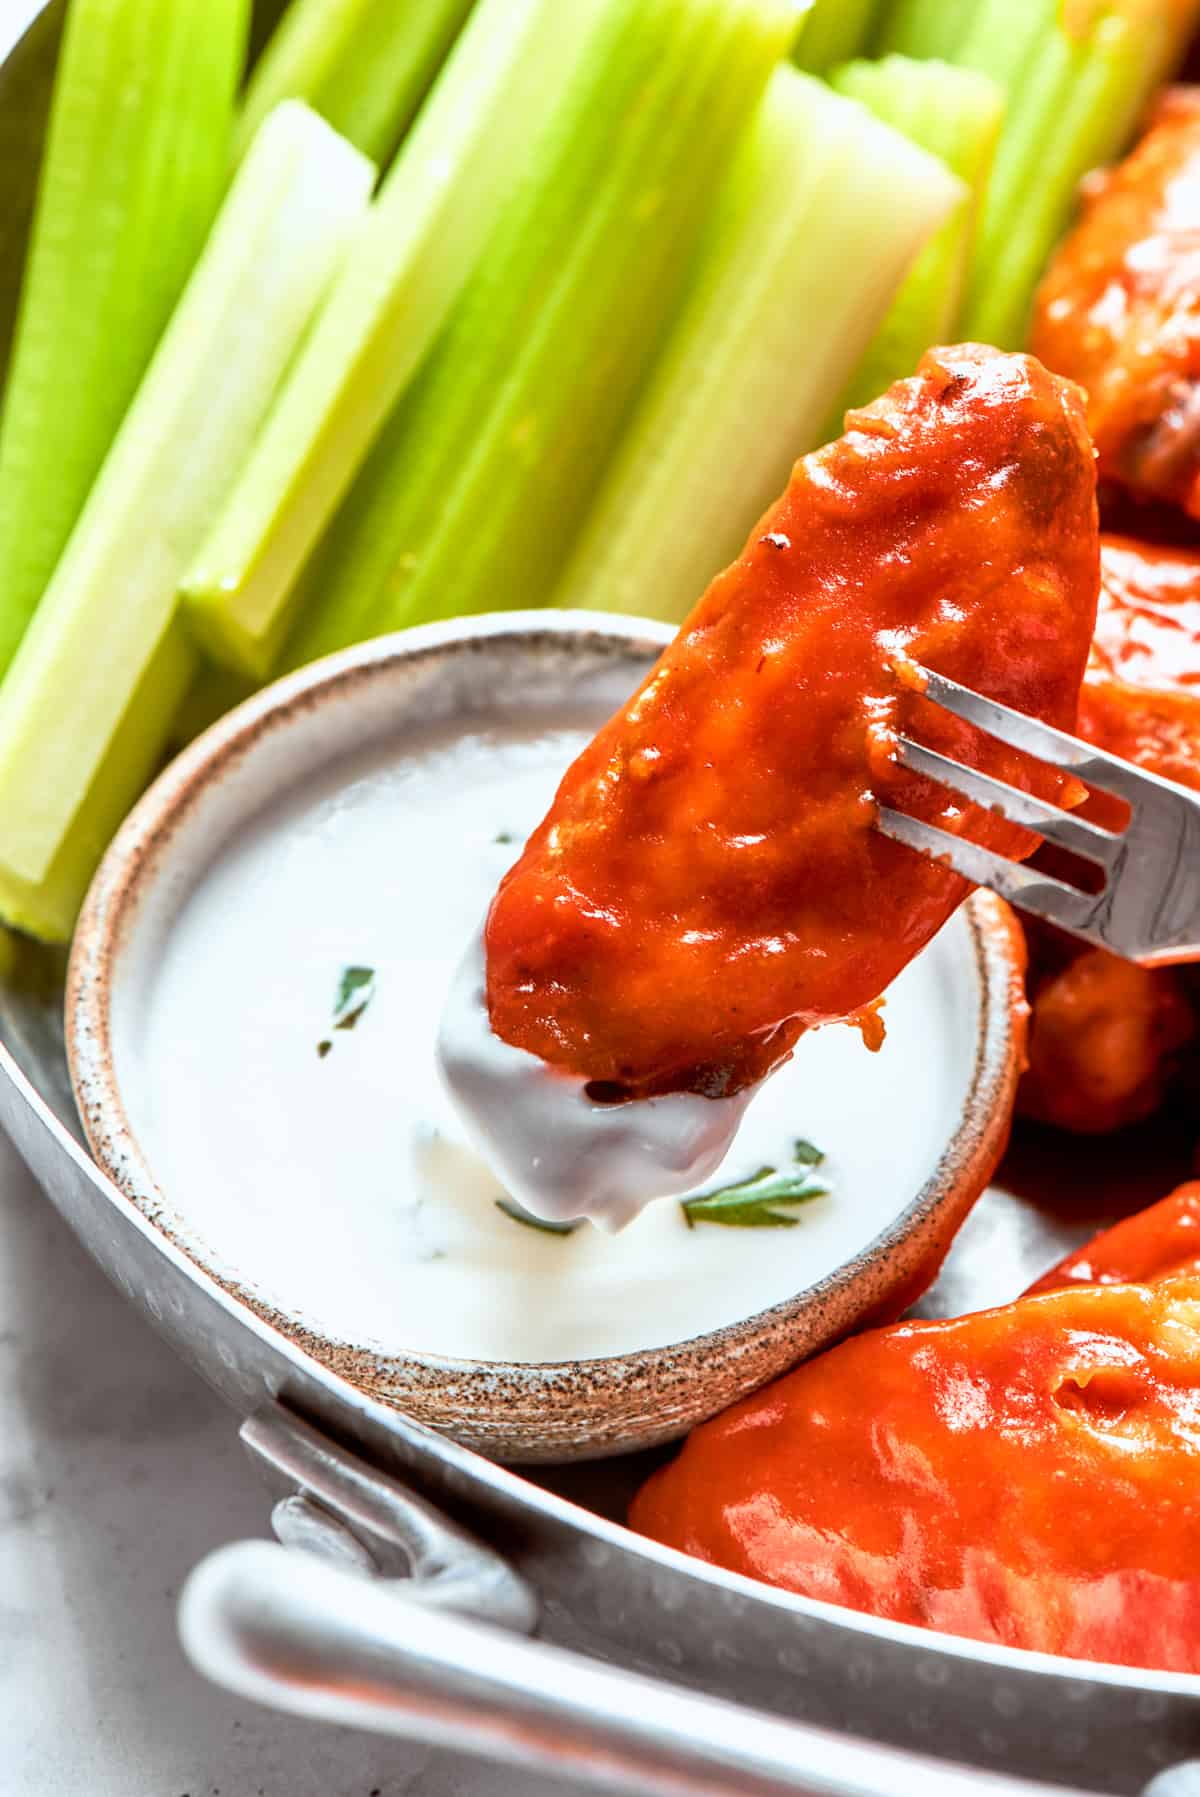 Dipping a chicken wing into ranch sauce.